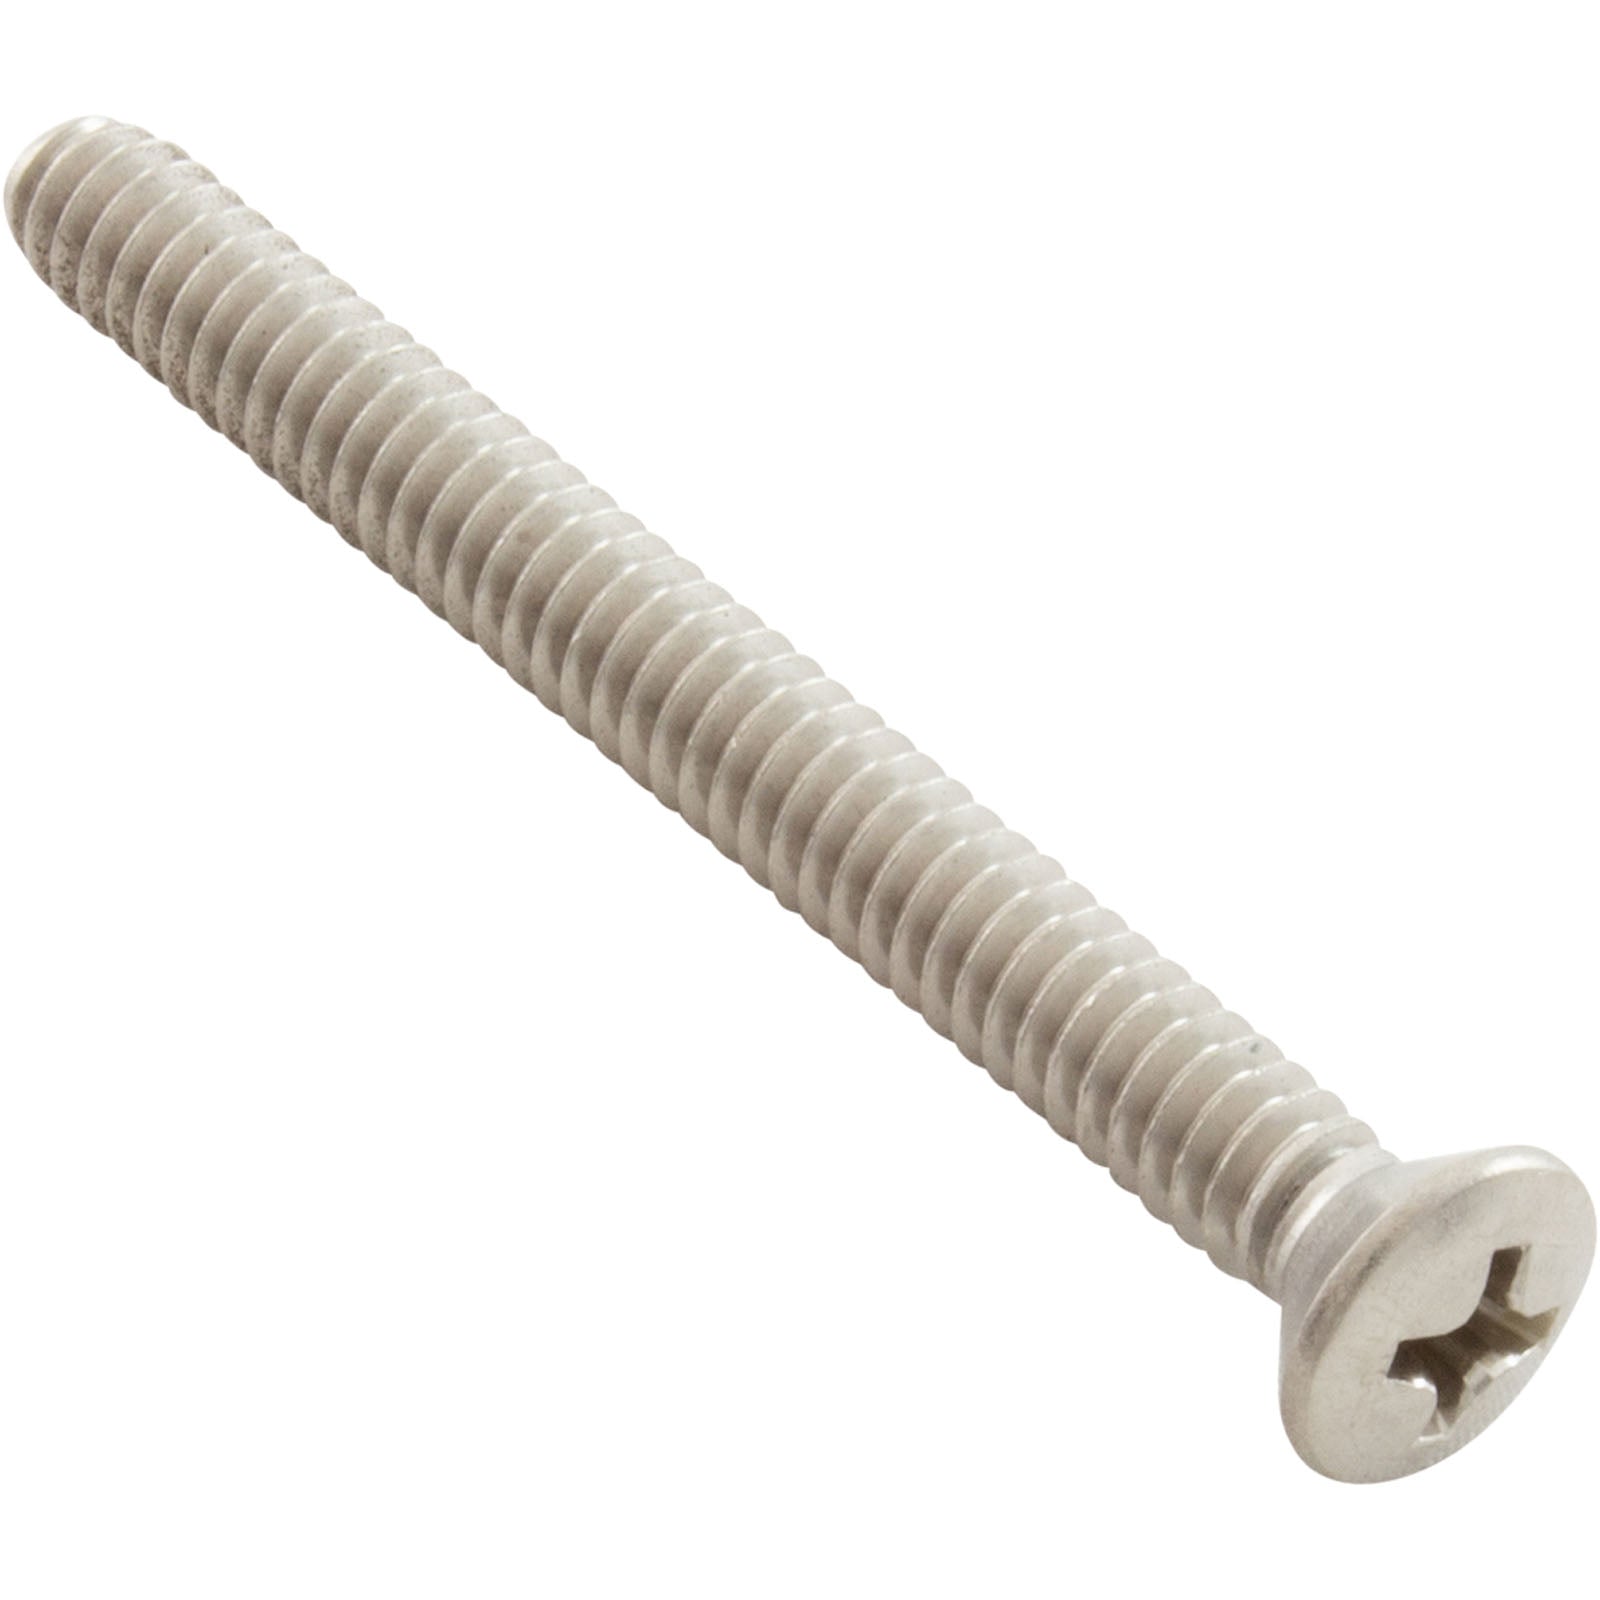 Jacuzzi Whirlpool Screw [Suction Cover 6651940] (3959000)